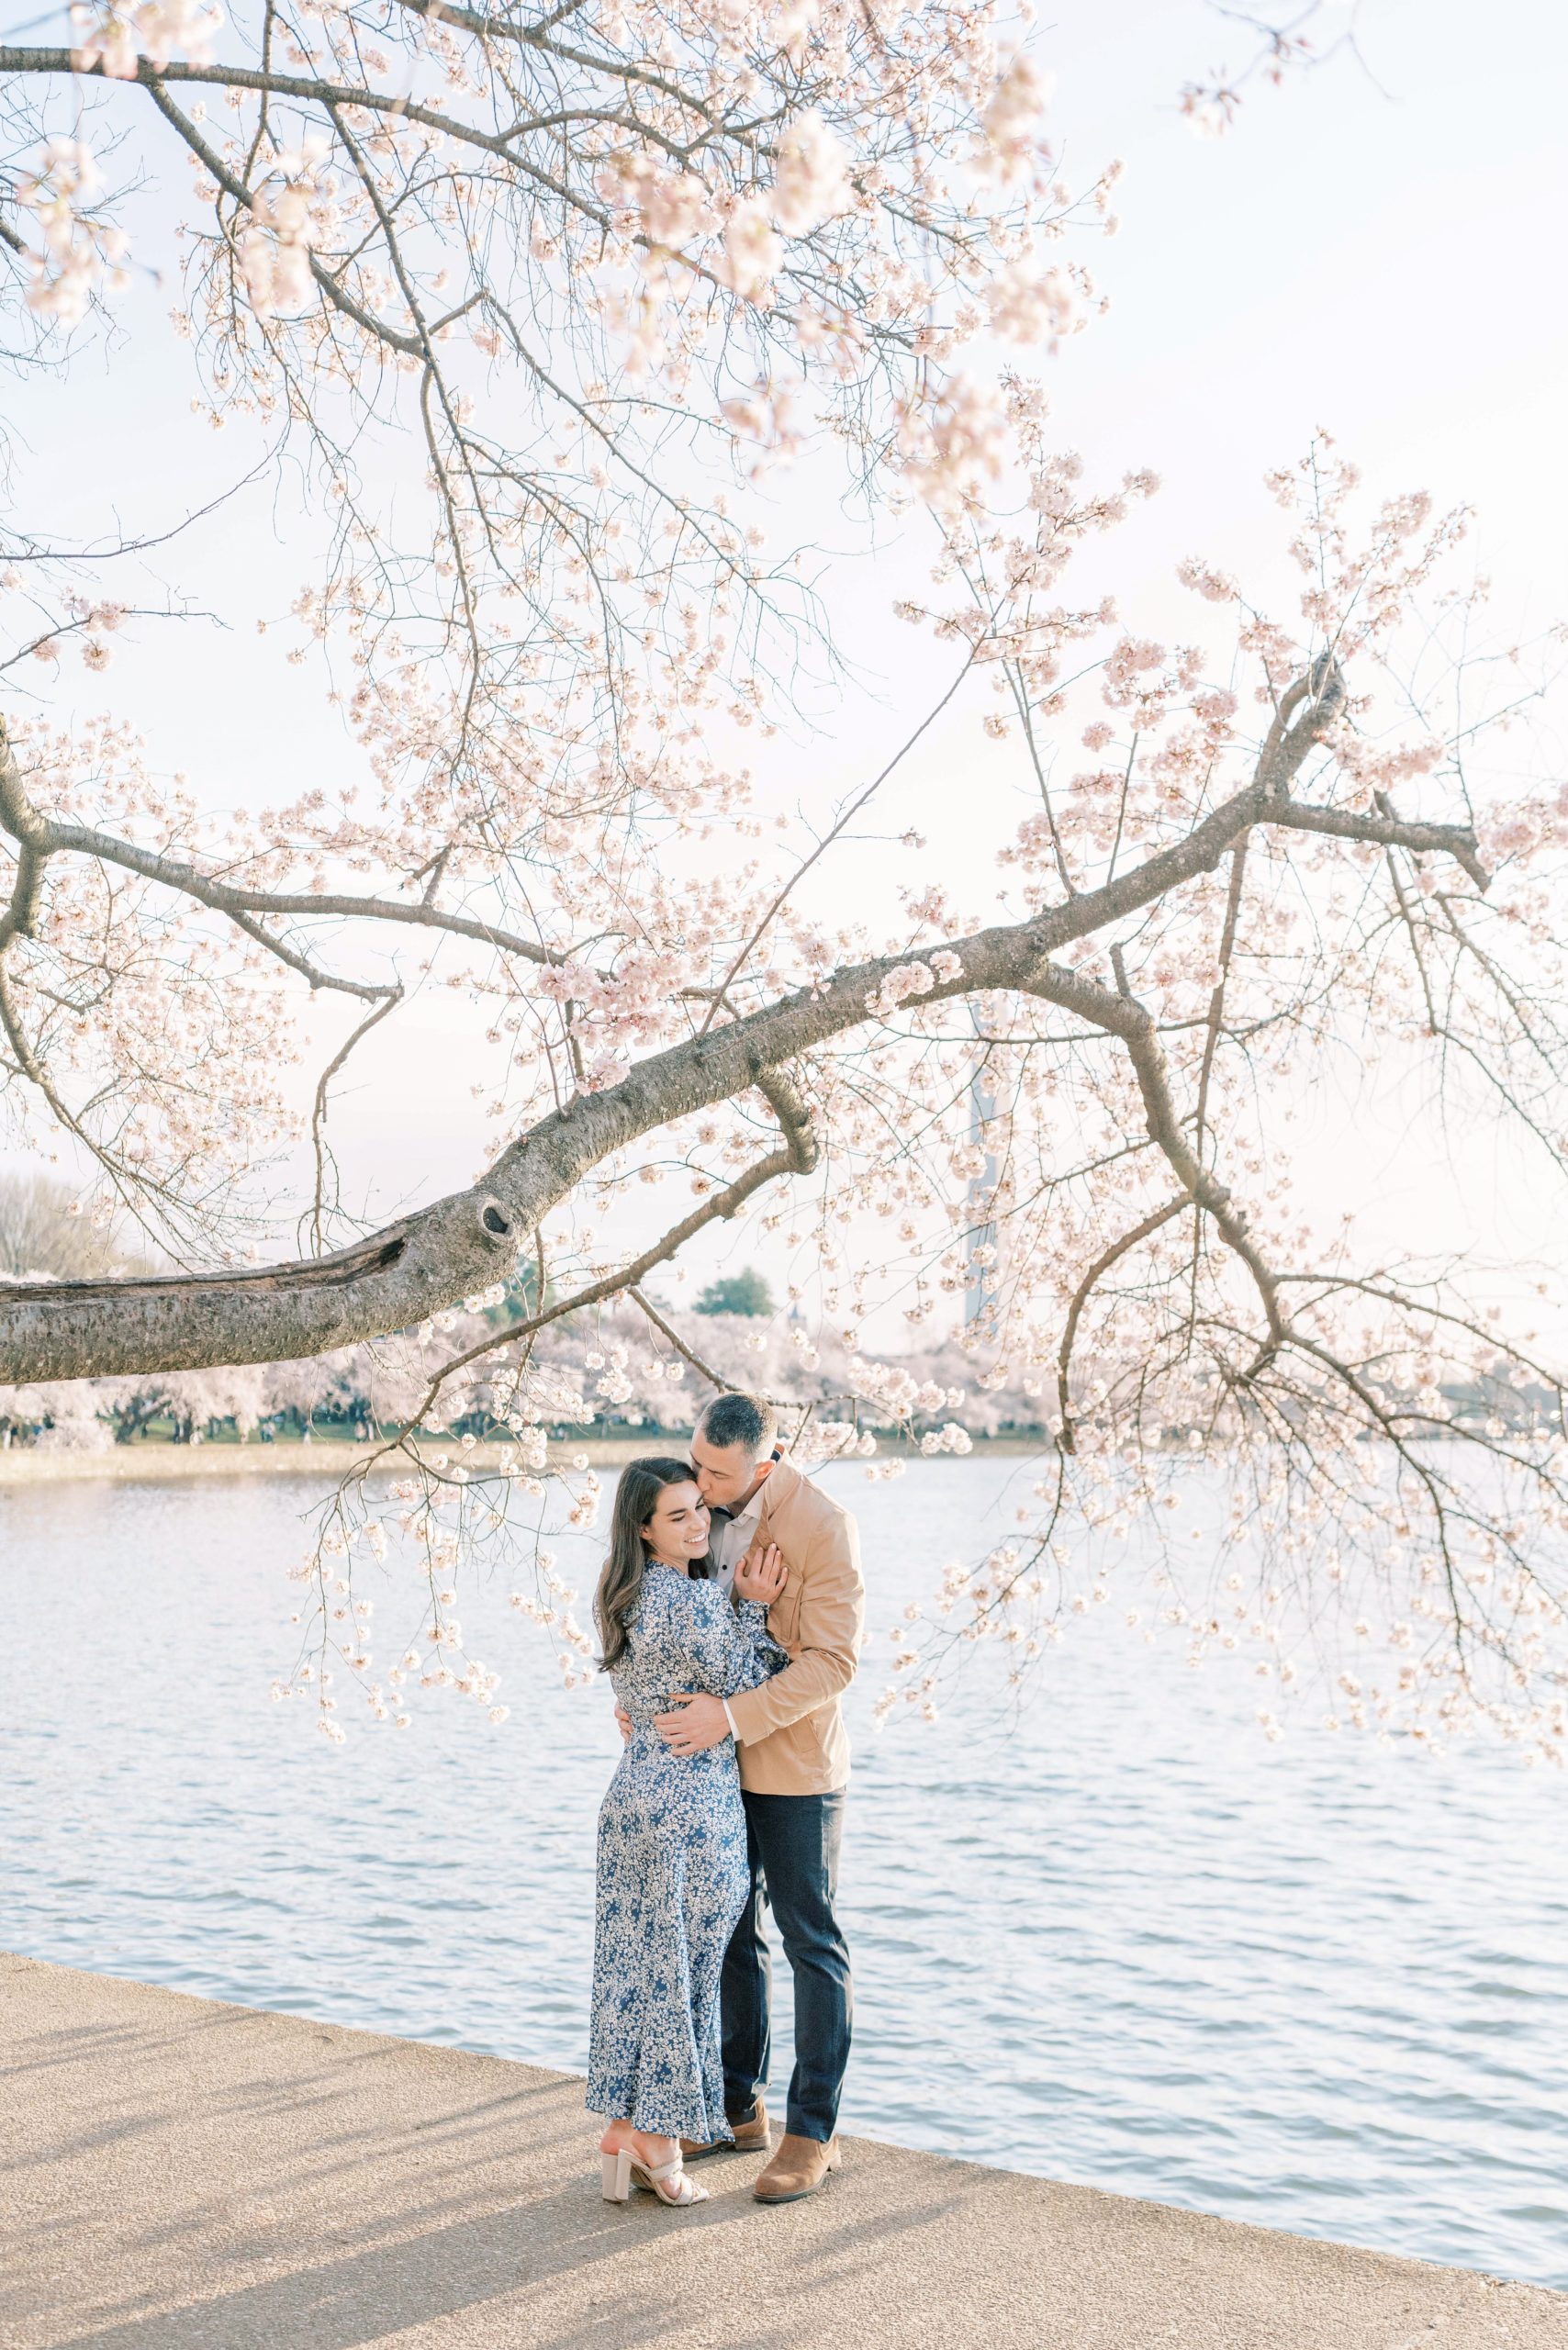 An iconic cherry blossom engagement session at the Tidal Basin of the Jefferson Memorial in Washington, DC during peak bloom!